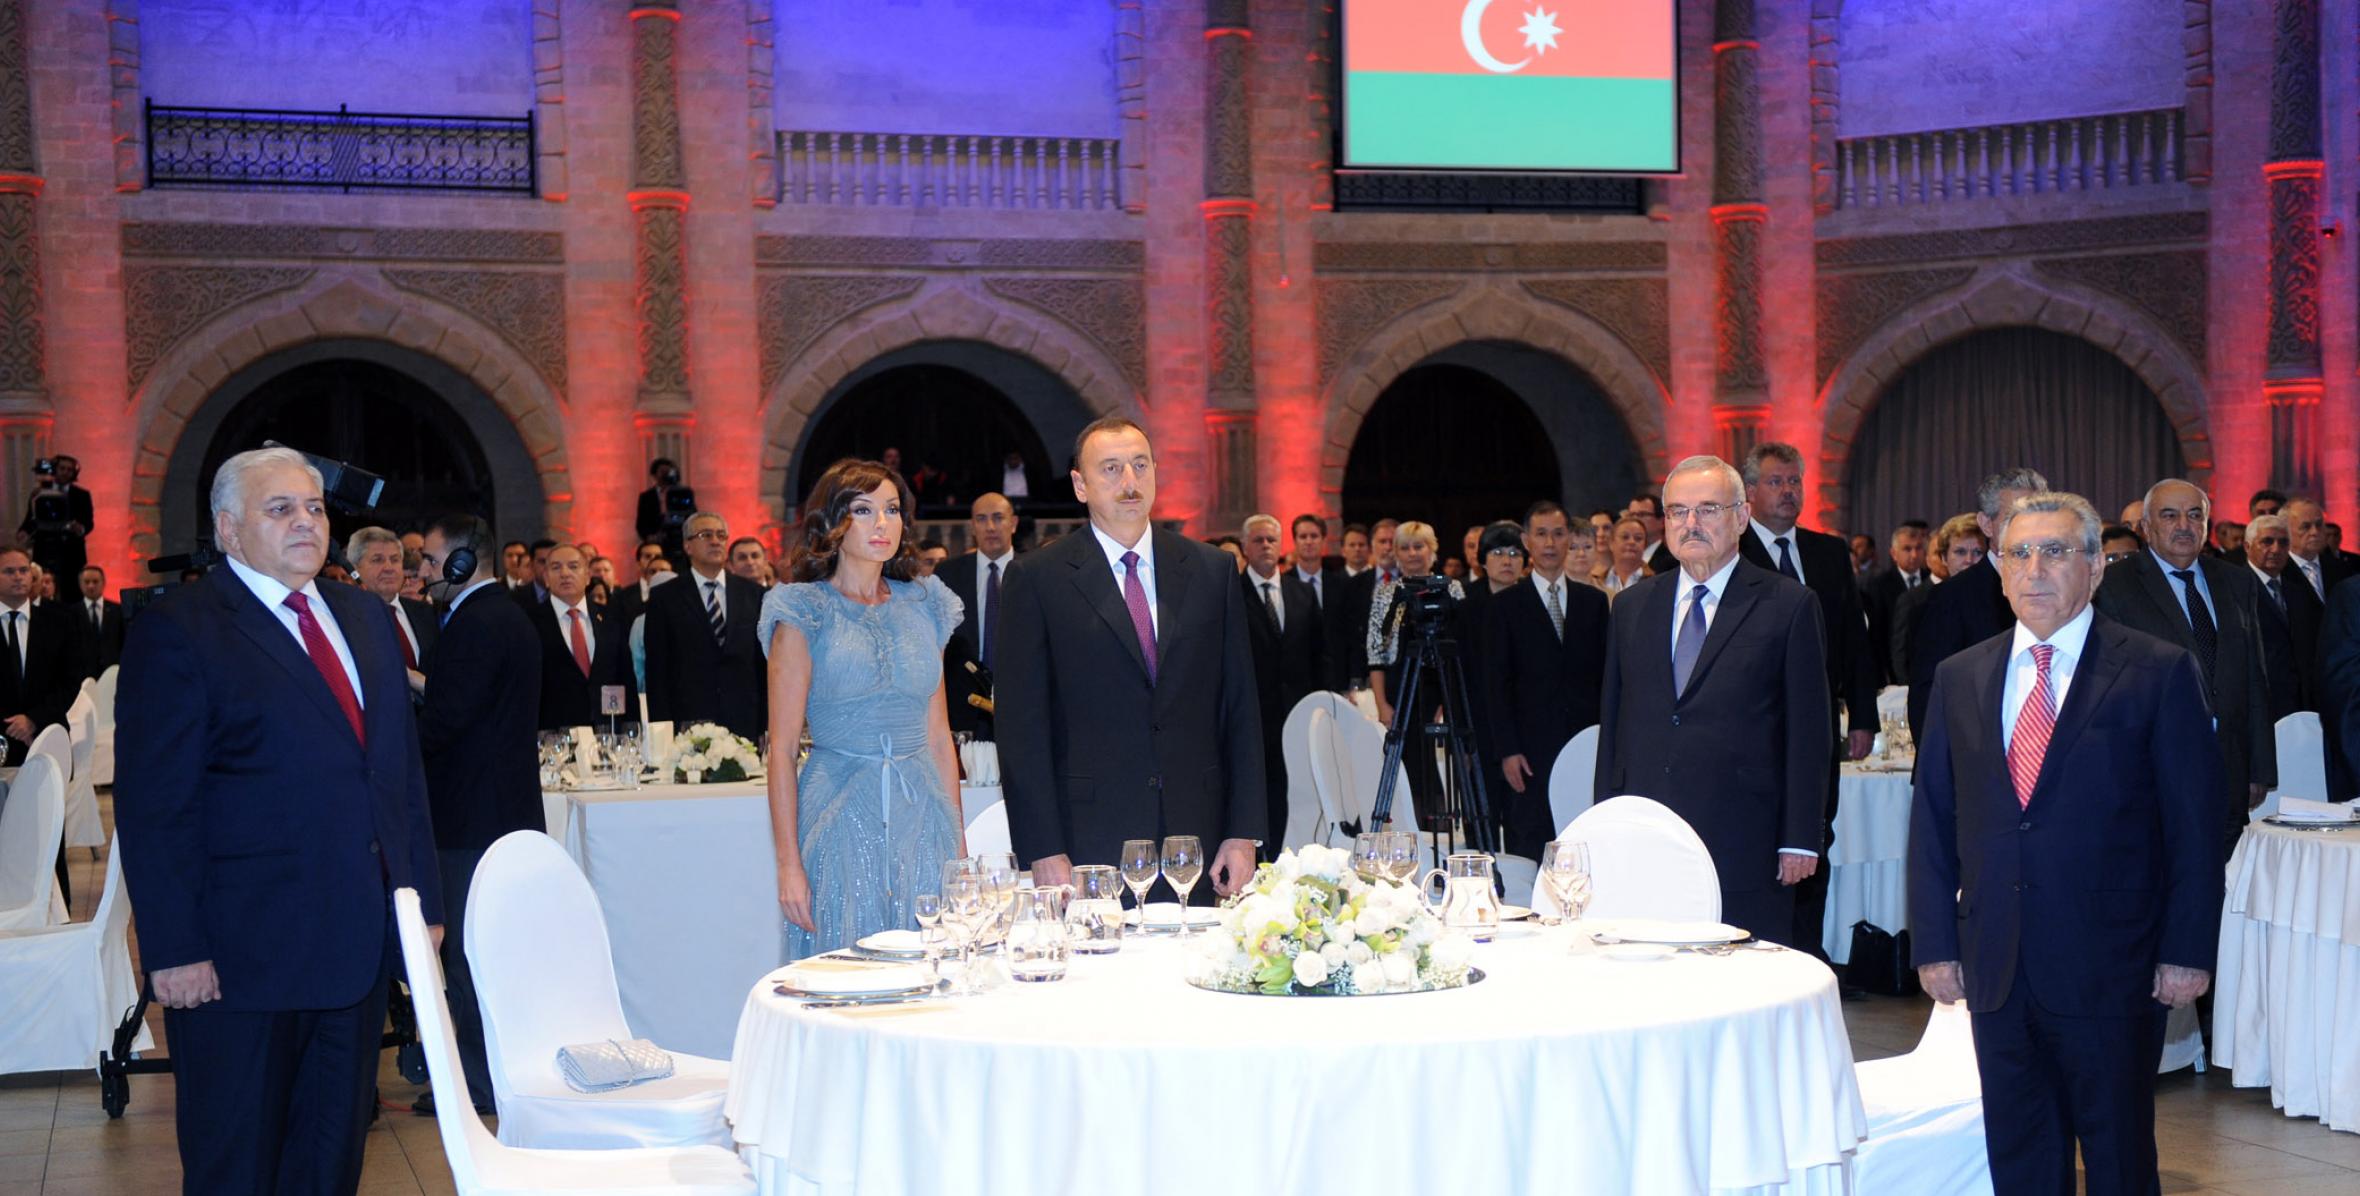 Ilham Aliyev participated in an official reception marking the 20th anniversary of the restoration of state independence of the Republic of Azerbaijan